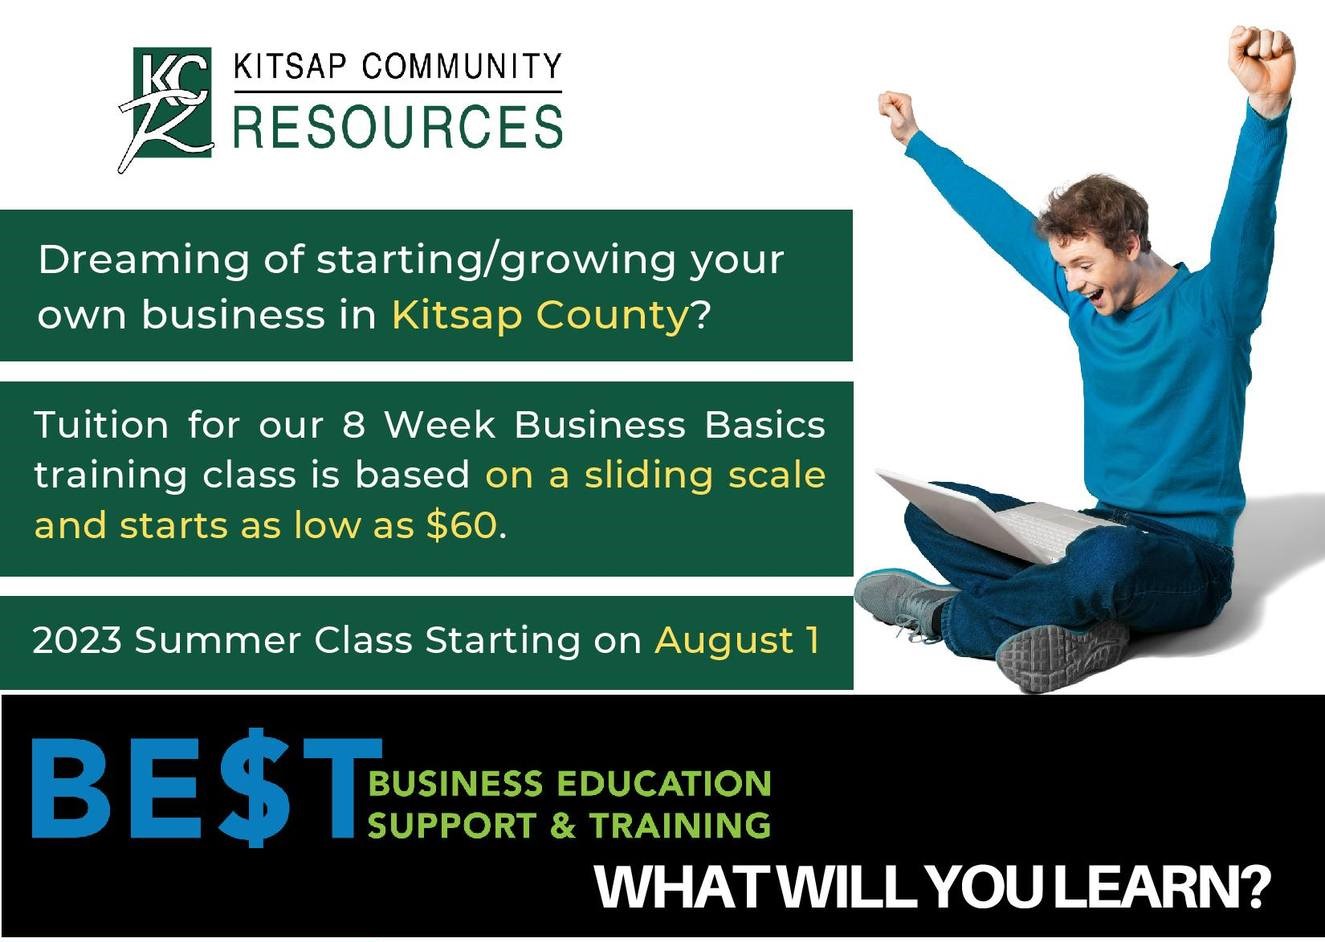 Business Educations Support & Training summer class is starting on August 1. Main Photo